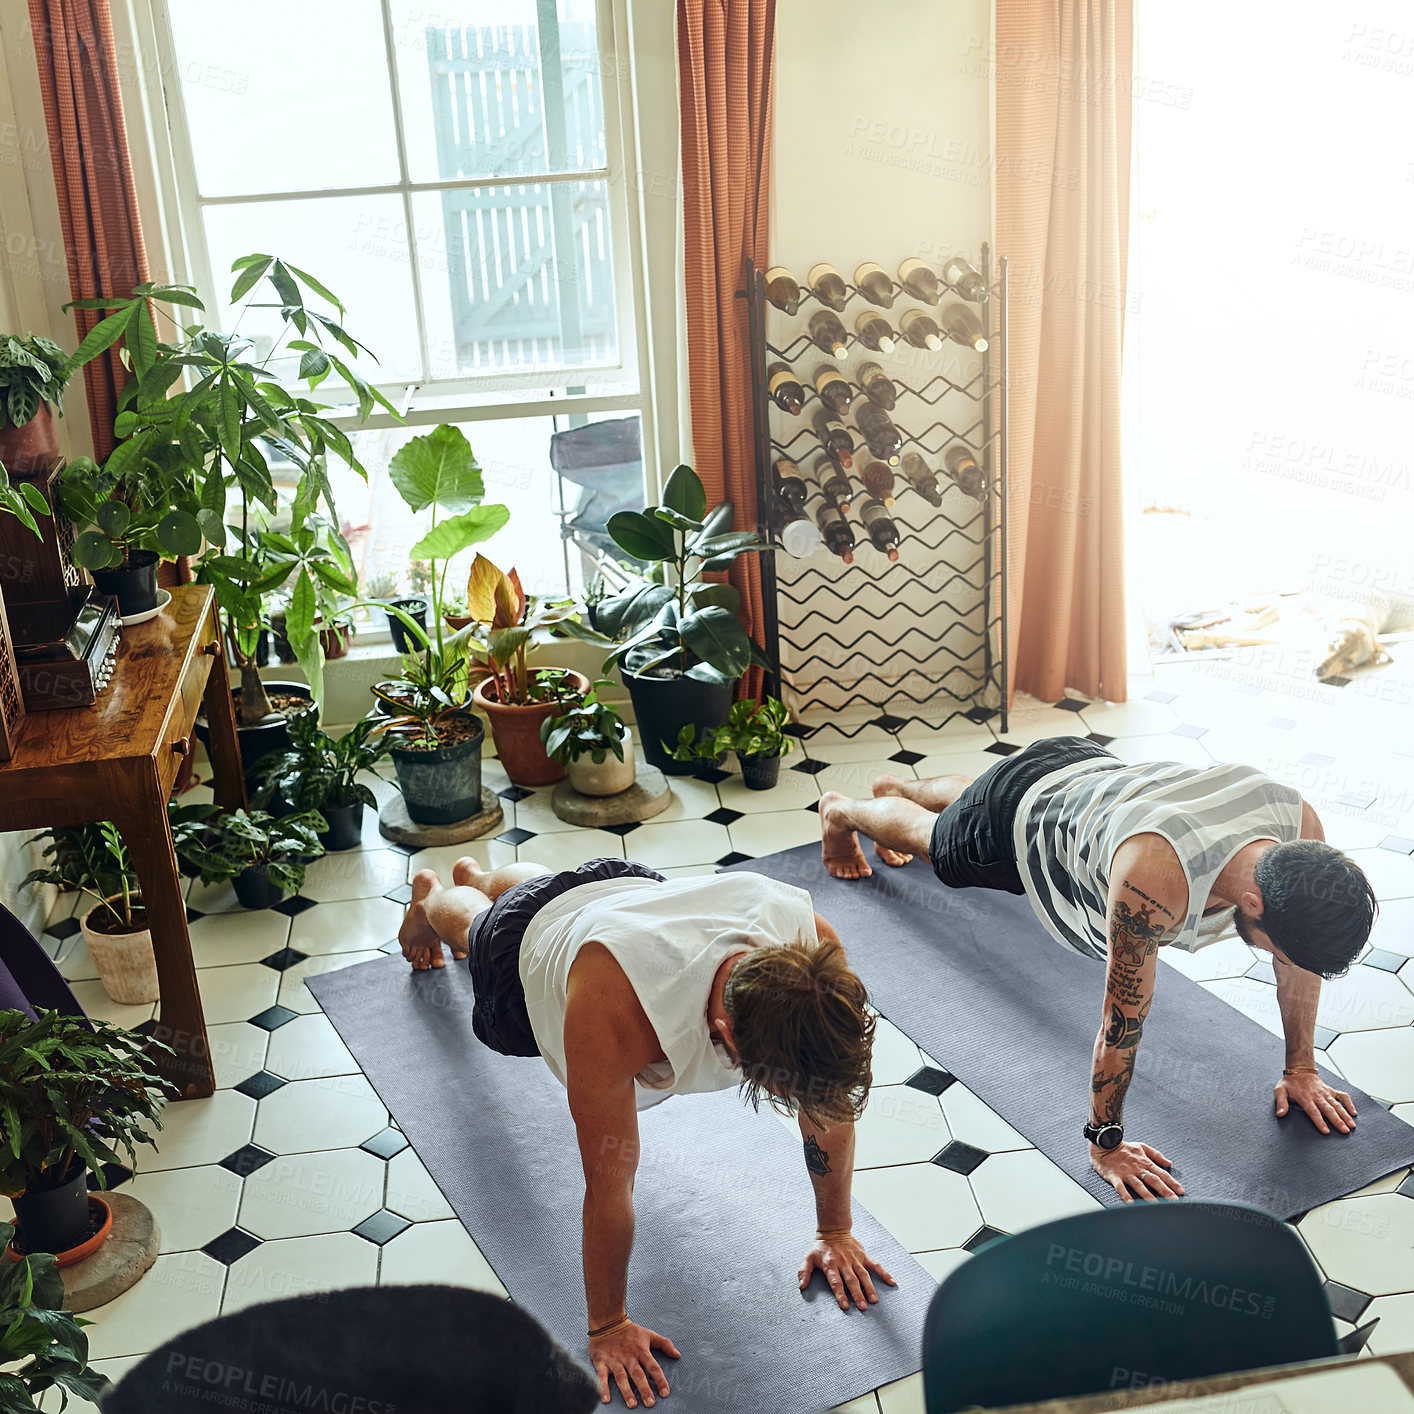 Buy stock photo Shot of two young men doing planks during a yoga routine at home